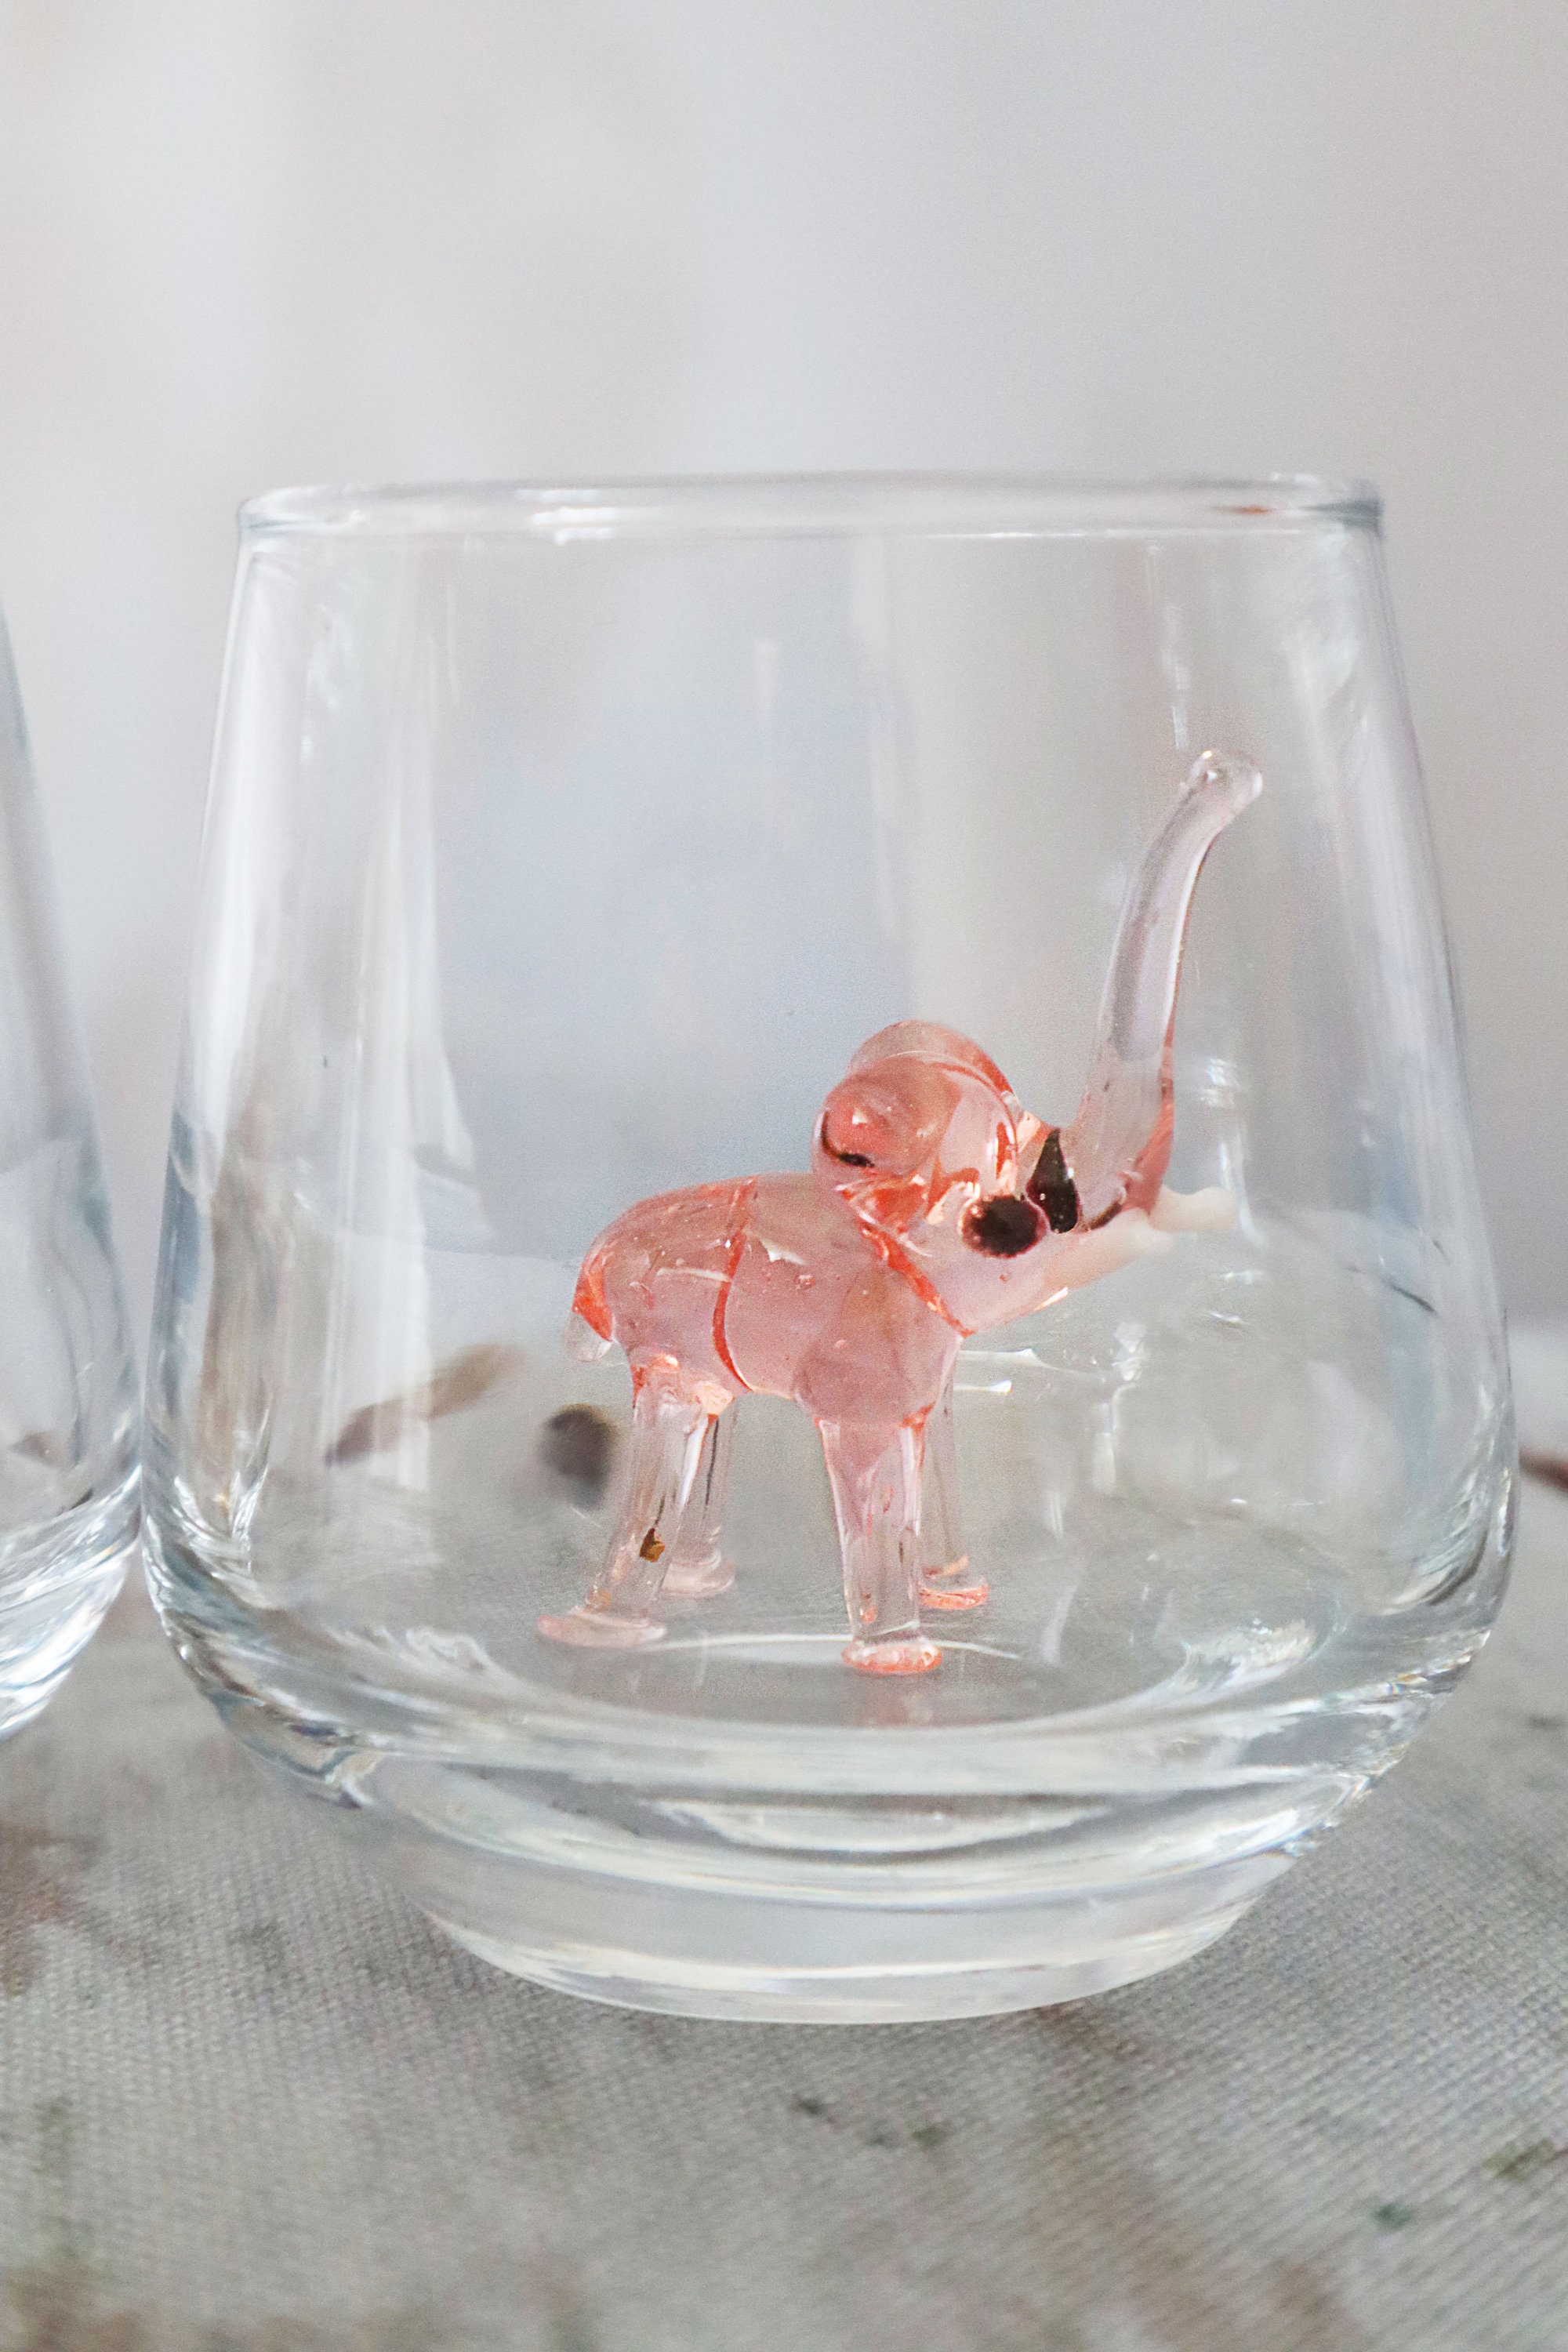 Hipster Elephant with a top hat drinking glass — Mixing Spirits